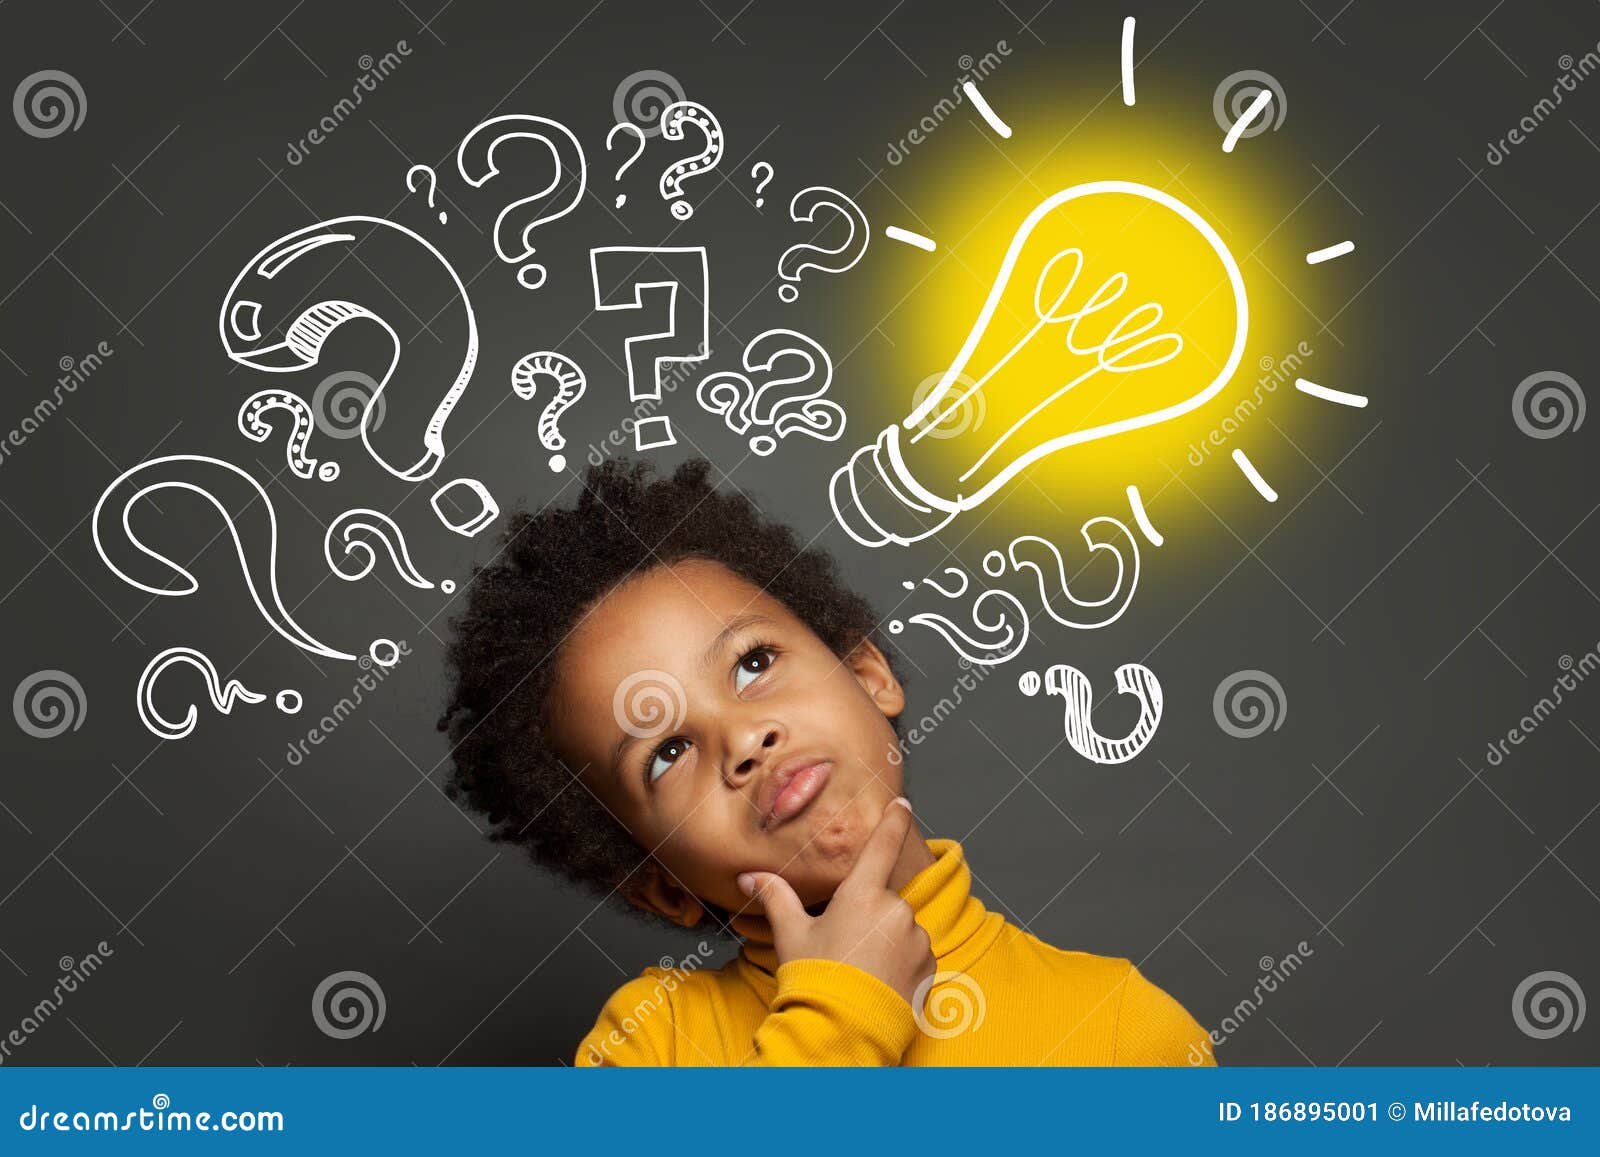 thinking child boy on black background with light bulb and question marks. brainstorming and idea concept